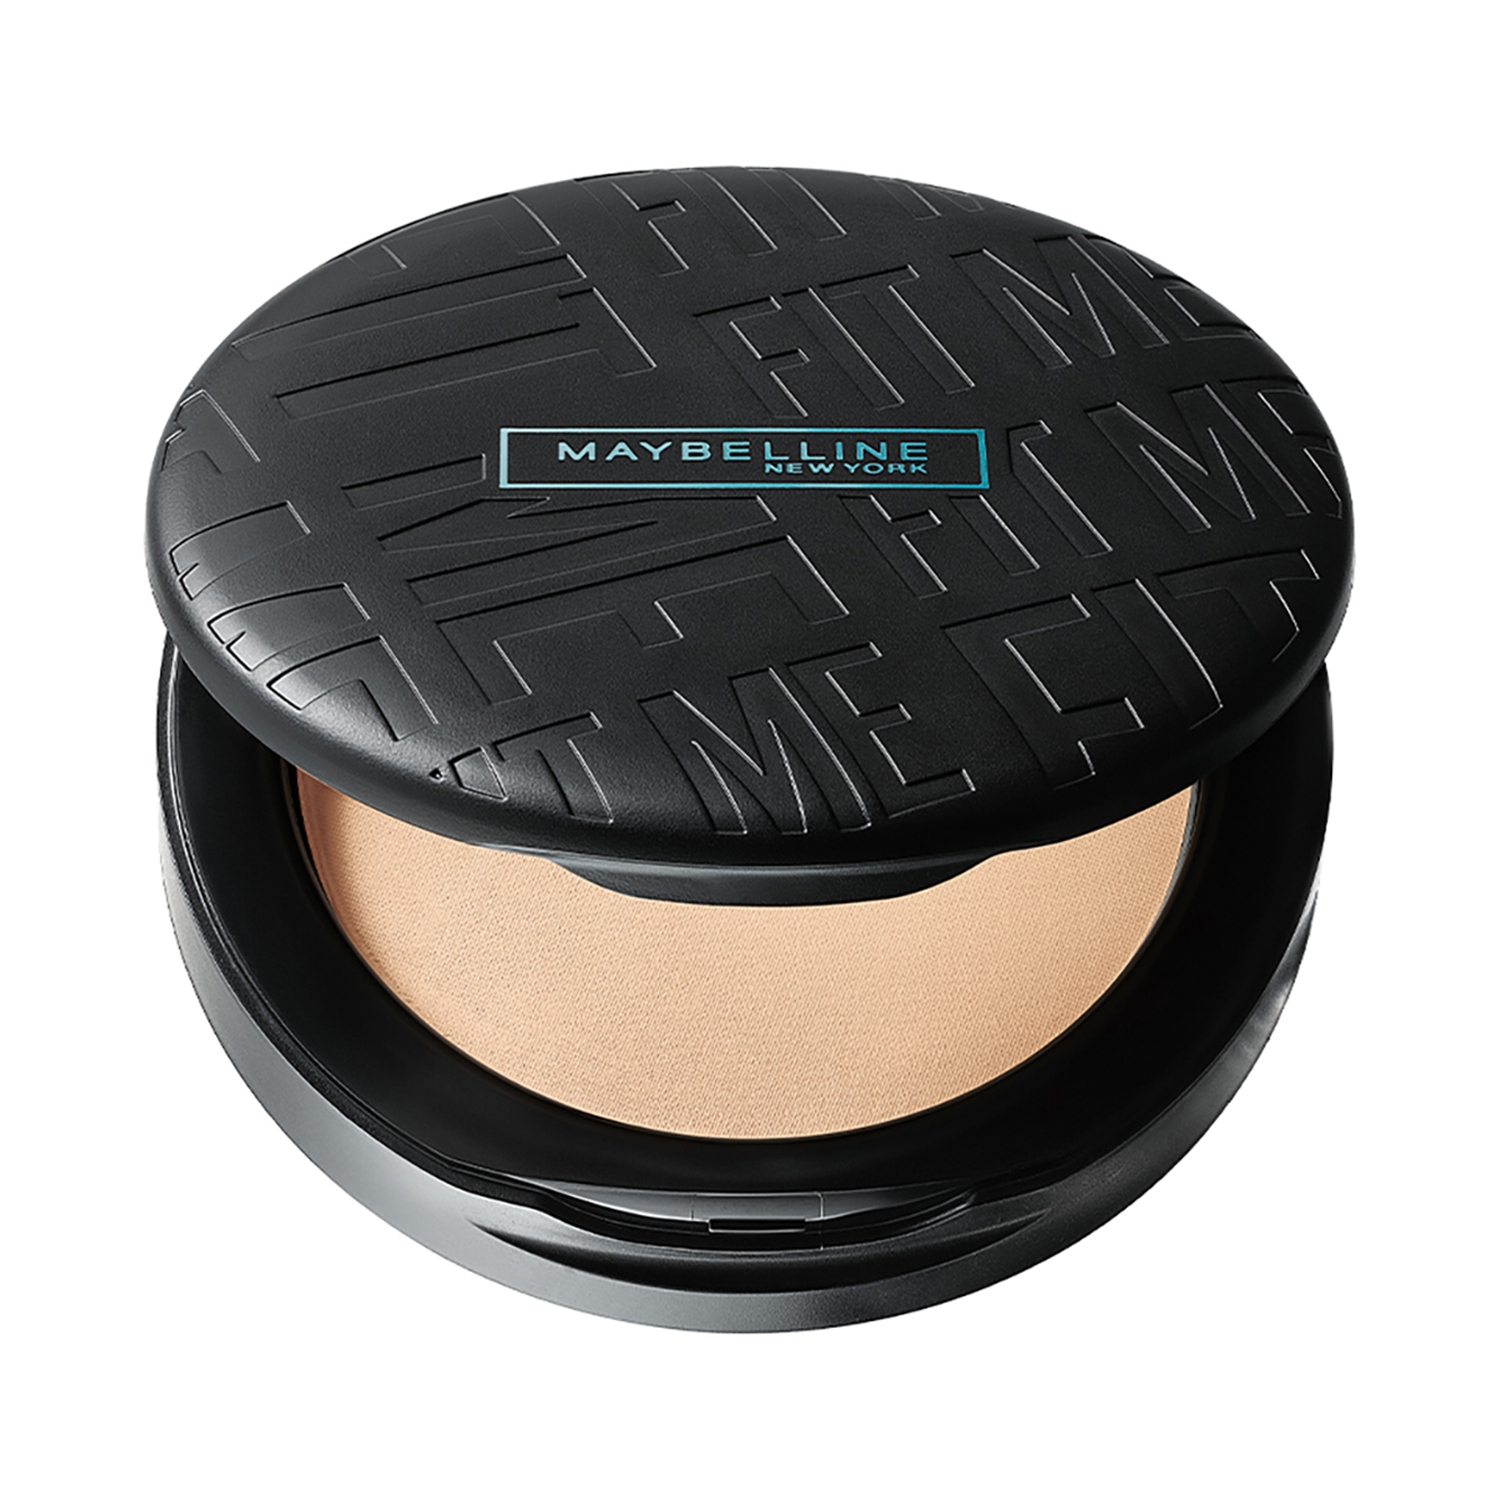 Maybelline New York Fit Me Foundation Tube, 115 + Fit Me Compact Powder,  115 | Matte Foundation | Oil Control Compact Powder.